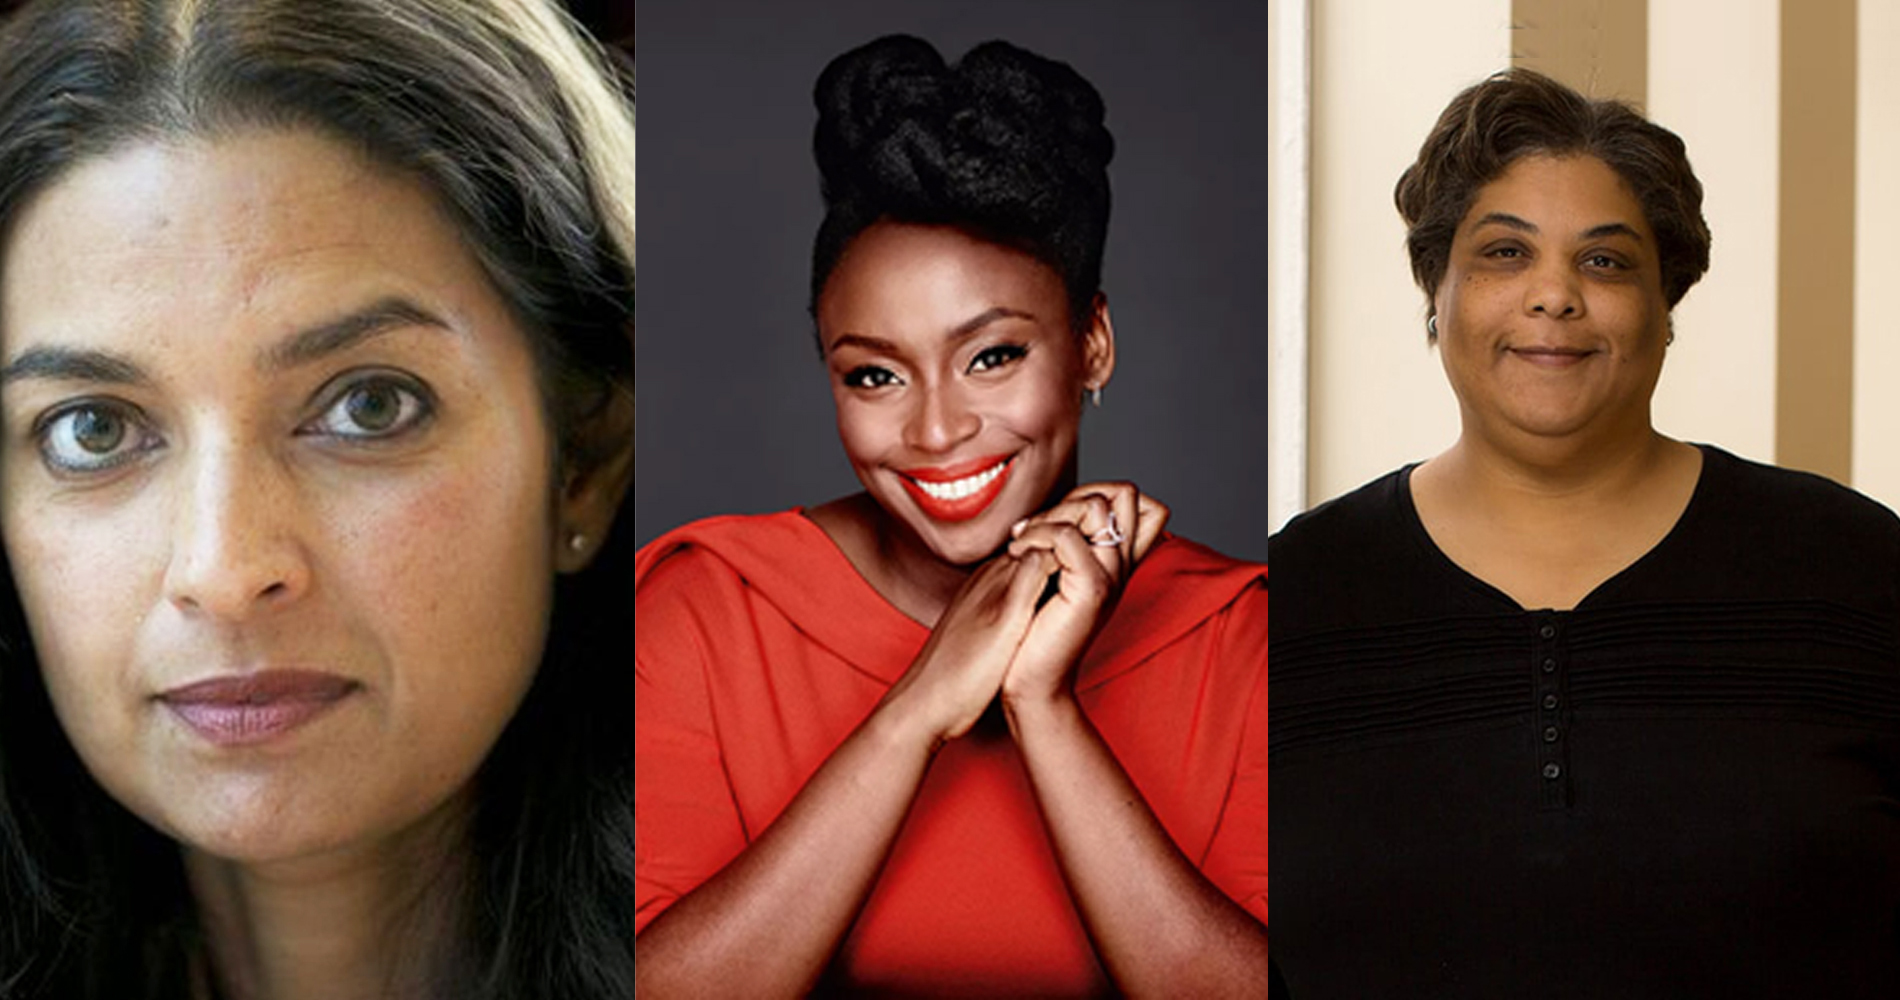 LOOKING FOR NEW READS? THESE WOMEN ARE TELLING STORIES YOU’VE NEVER HEARD BEFORE.